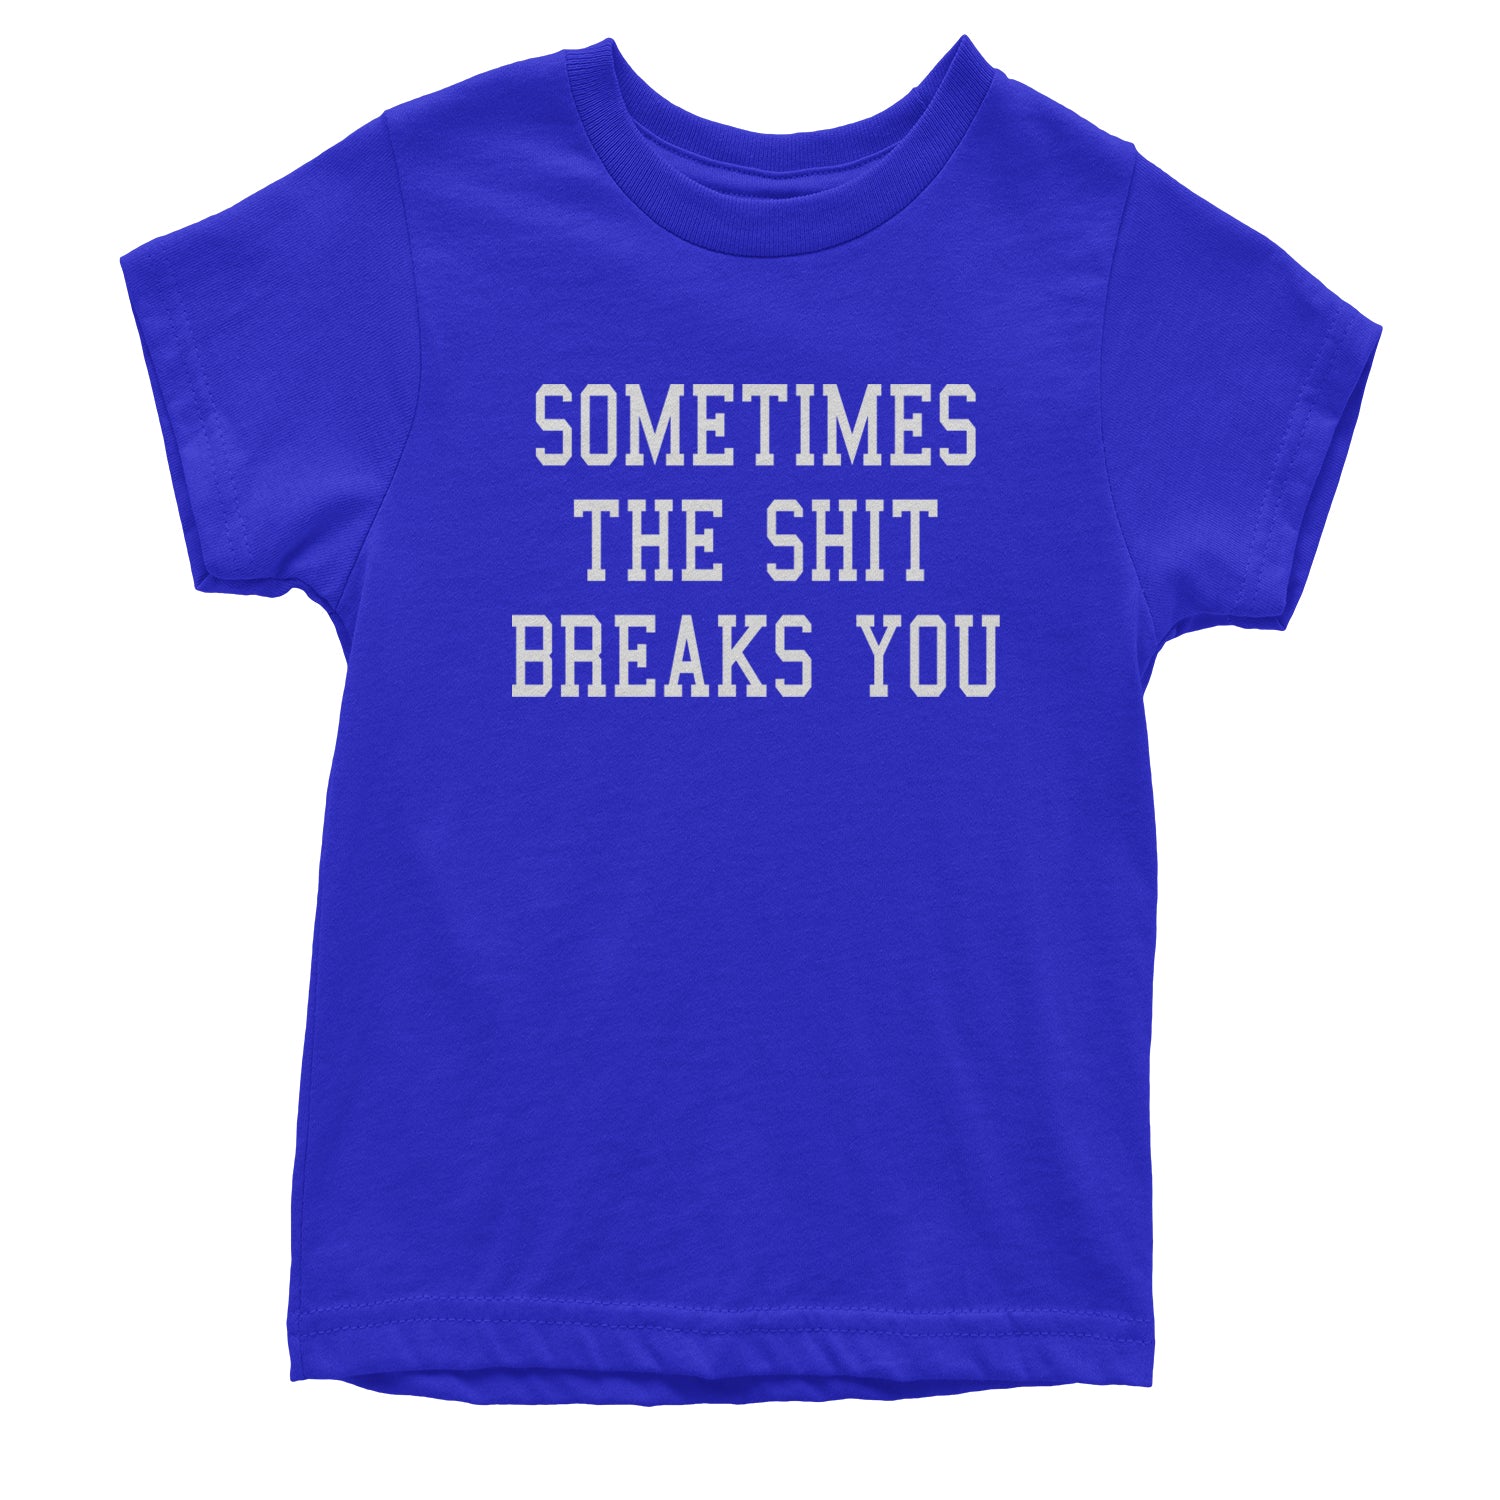 Sometimes The Sh-t Breaks You Youth T-shirt china, chinese, funny, in, man, meme, observed, shanghai, shirt by Expression Tees